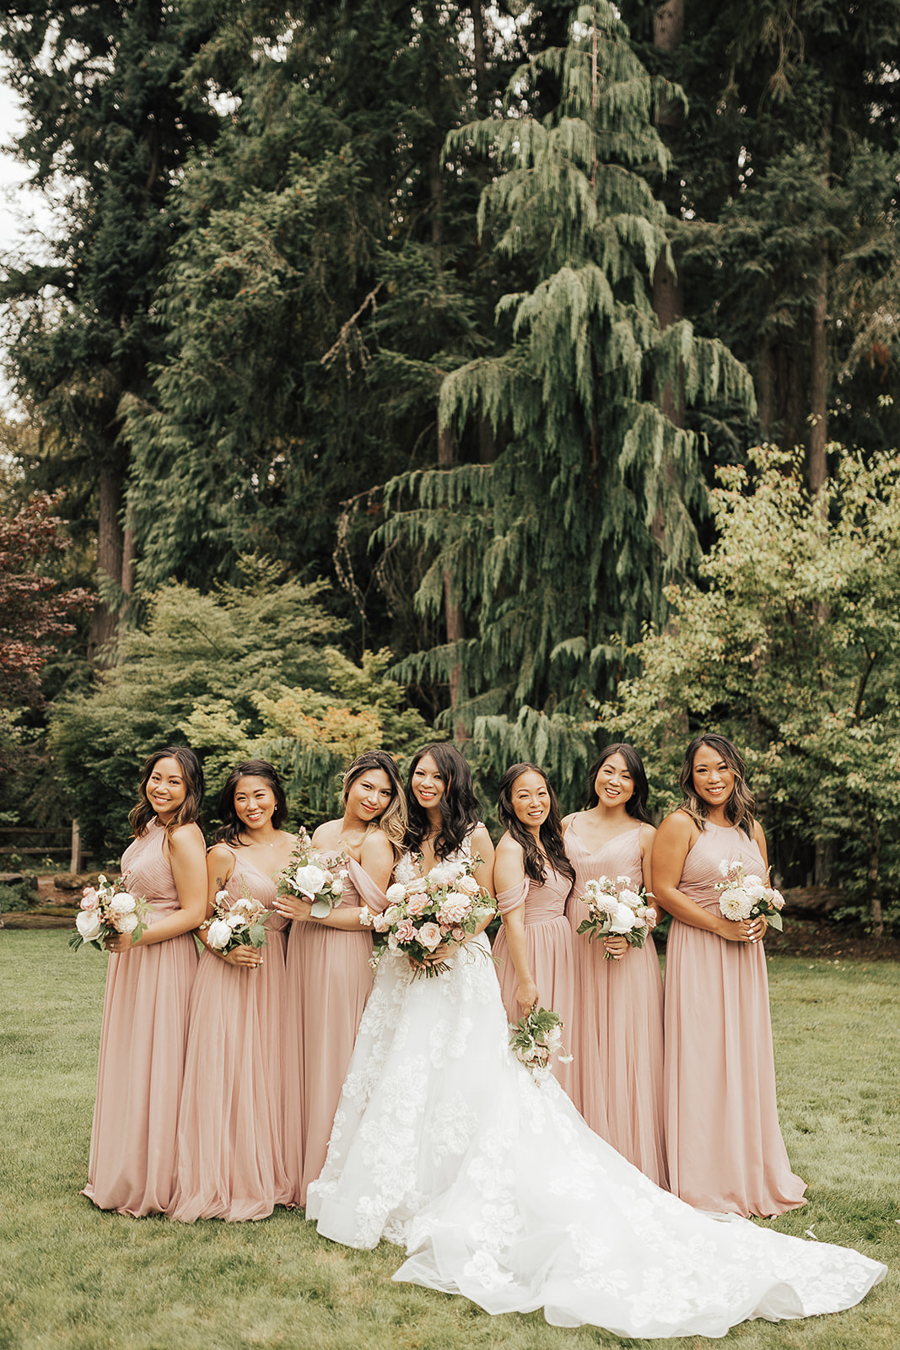 Ideas For Photo Poses with Bridesmaids & Groomsmen - Persian Wedding and  Party Services Blog Article By admin